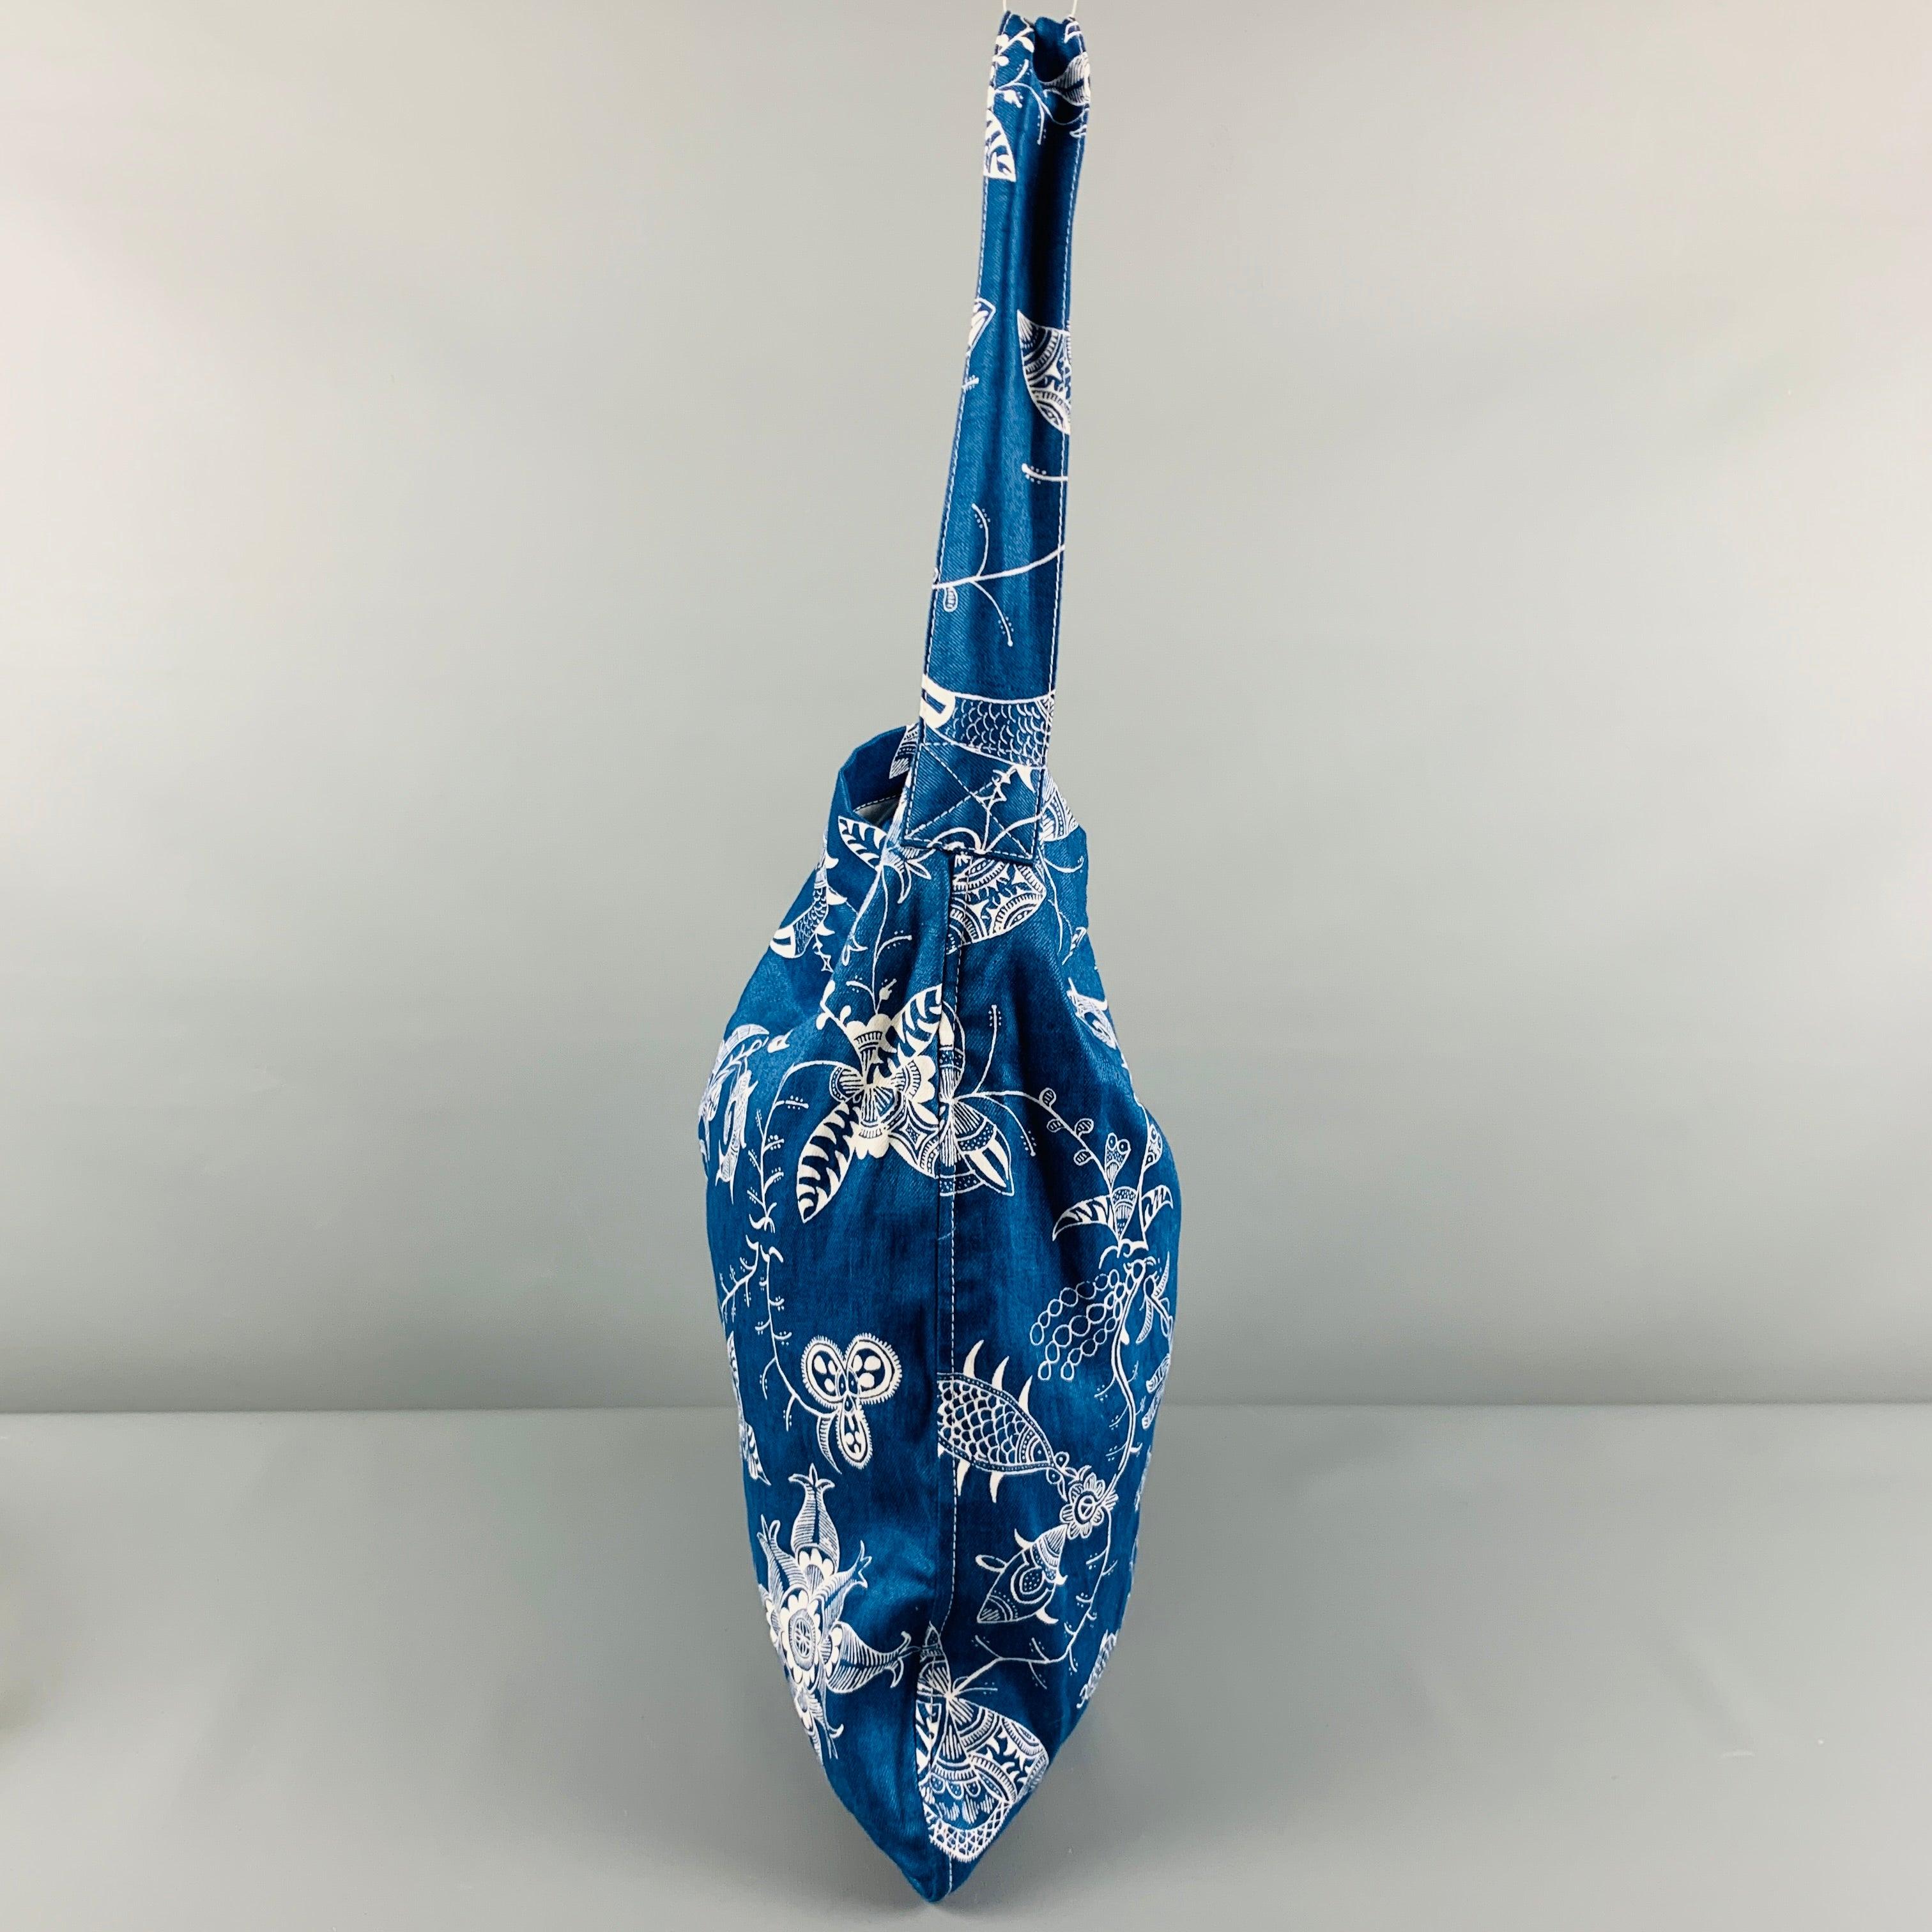 JUNYA WATANABE tote
in a blue and white linen fabric featuring abstract floral pattern, and snap closure.Very Good Pre-Owned Condition. Minor signs of wear. 

Measurements: 
  Length: 14 inches Height: 16 inches Drop: 10.5 inches 
  
  
 
Reference